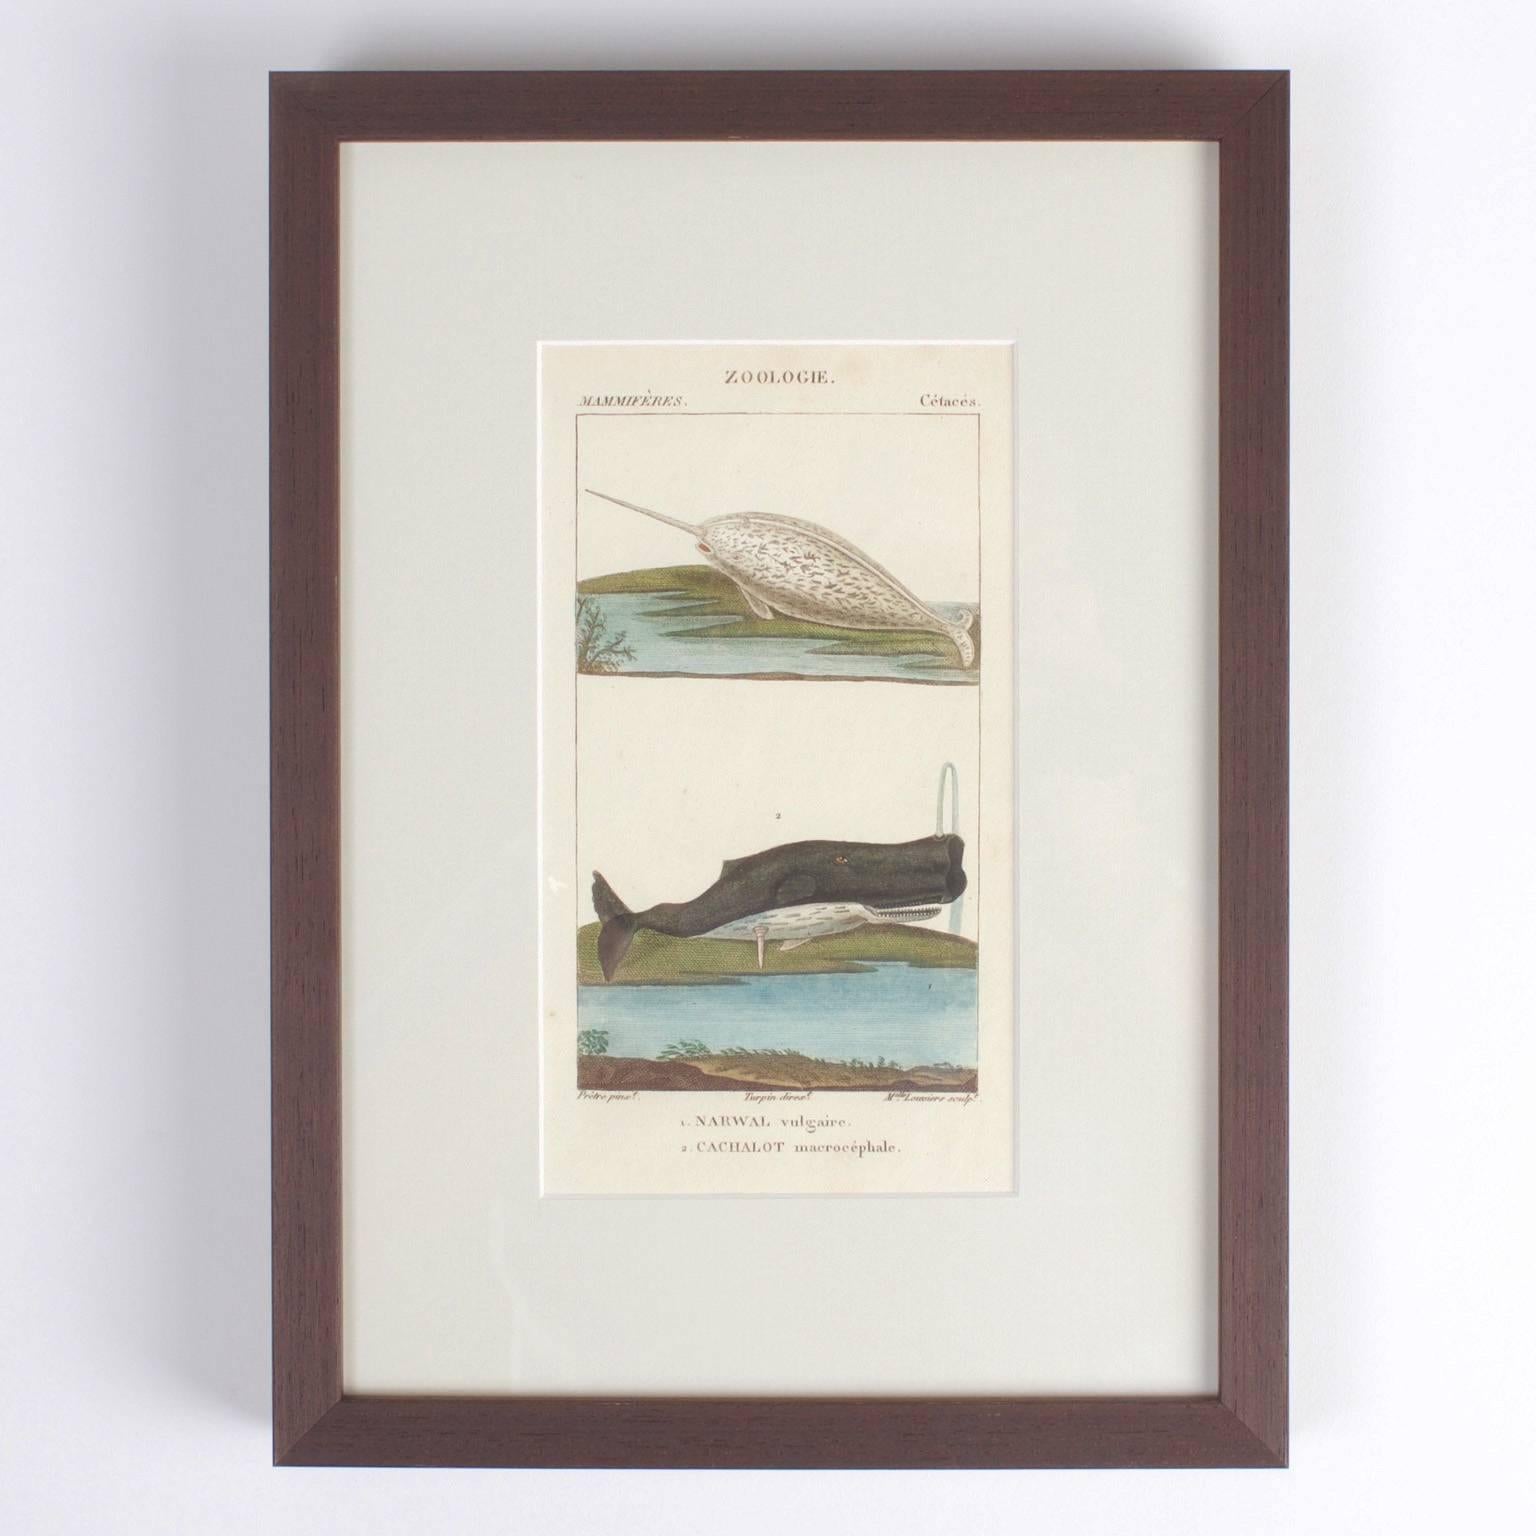 Historical pair of hand colored sea life engravings with a naive, timeless charm. Done at a time when naturalists where cataloging zoology. Signed on the bottom by the watercolorist and the engraver.